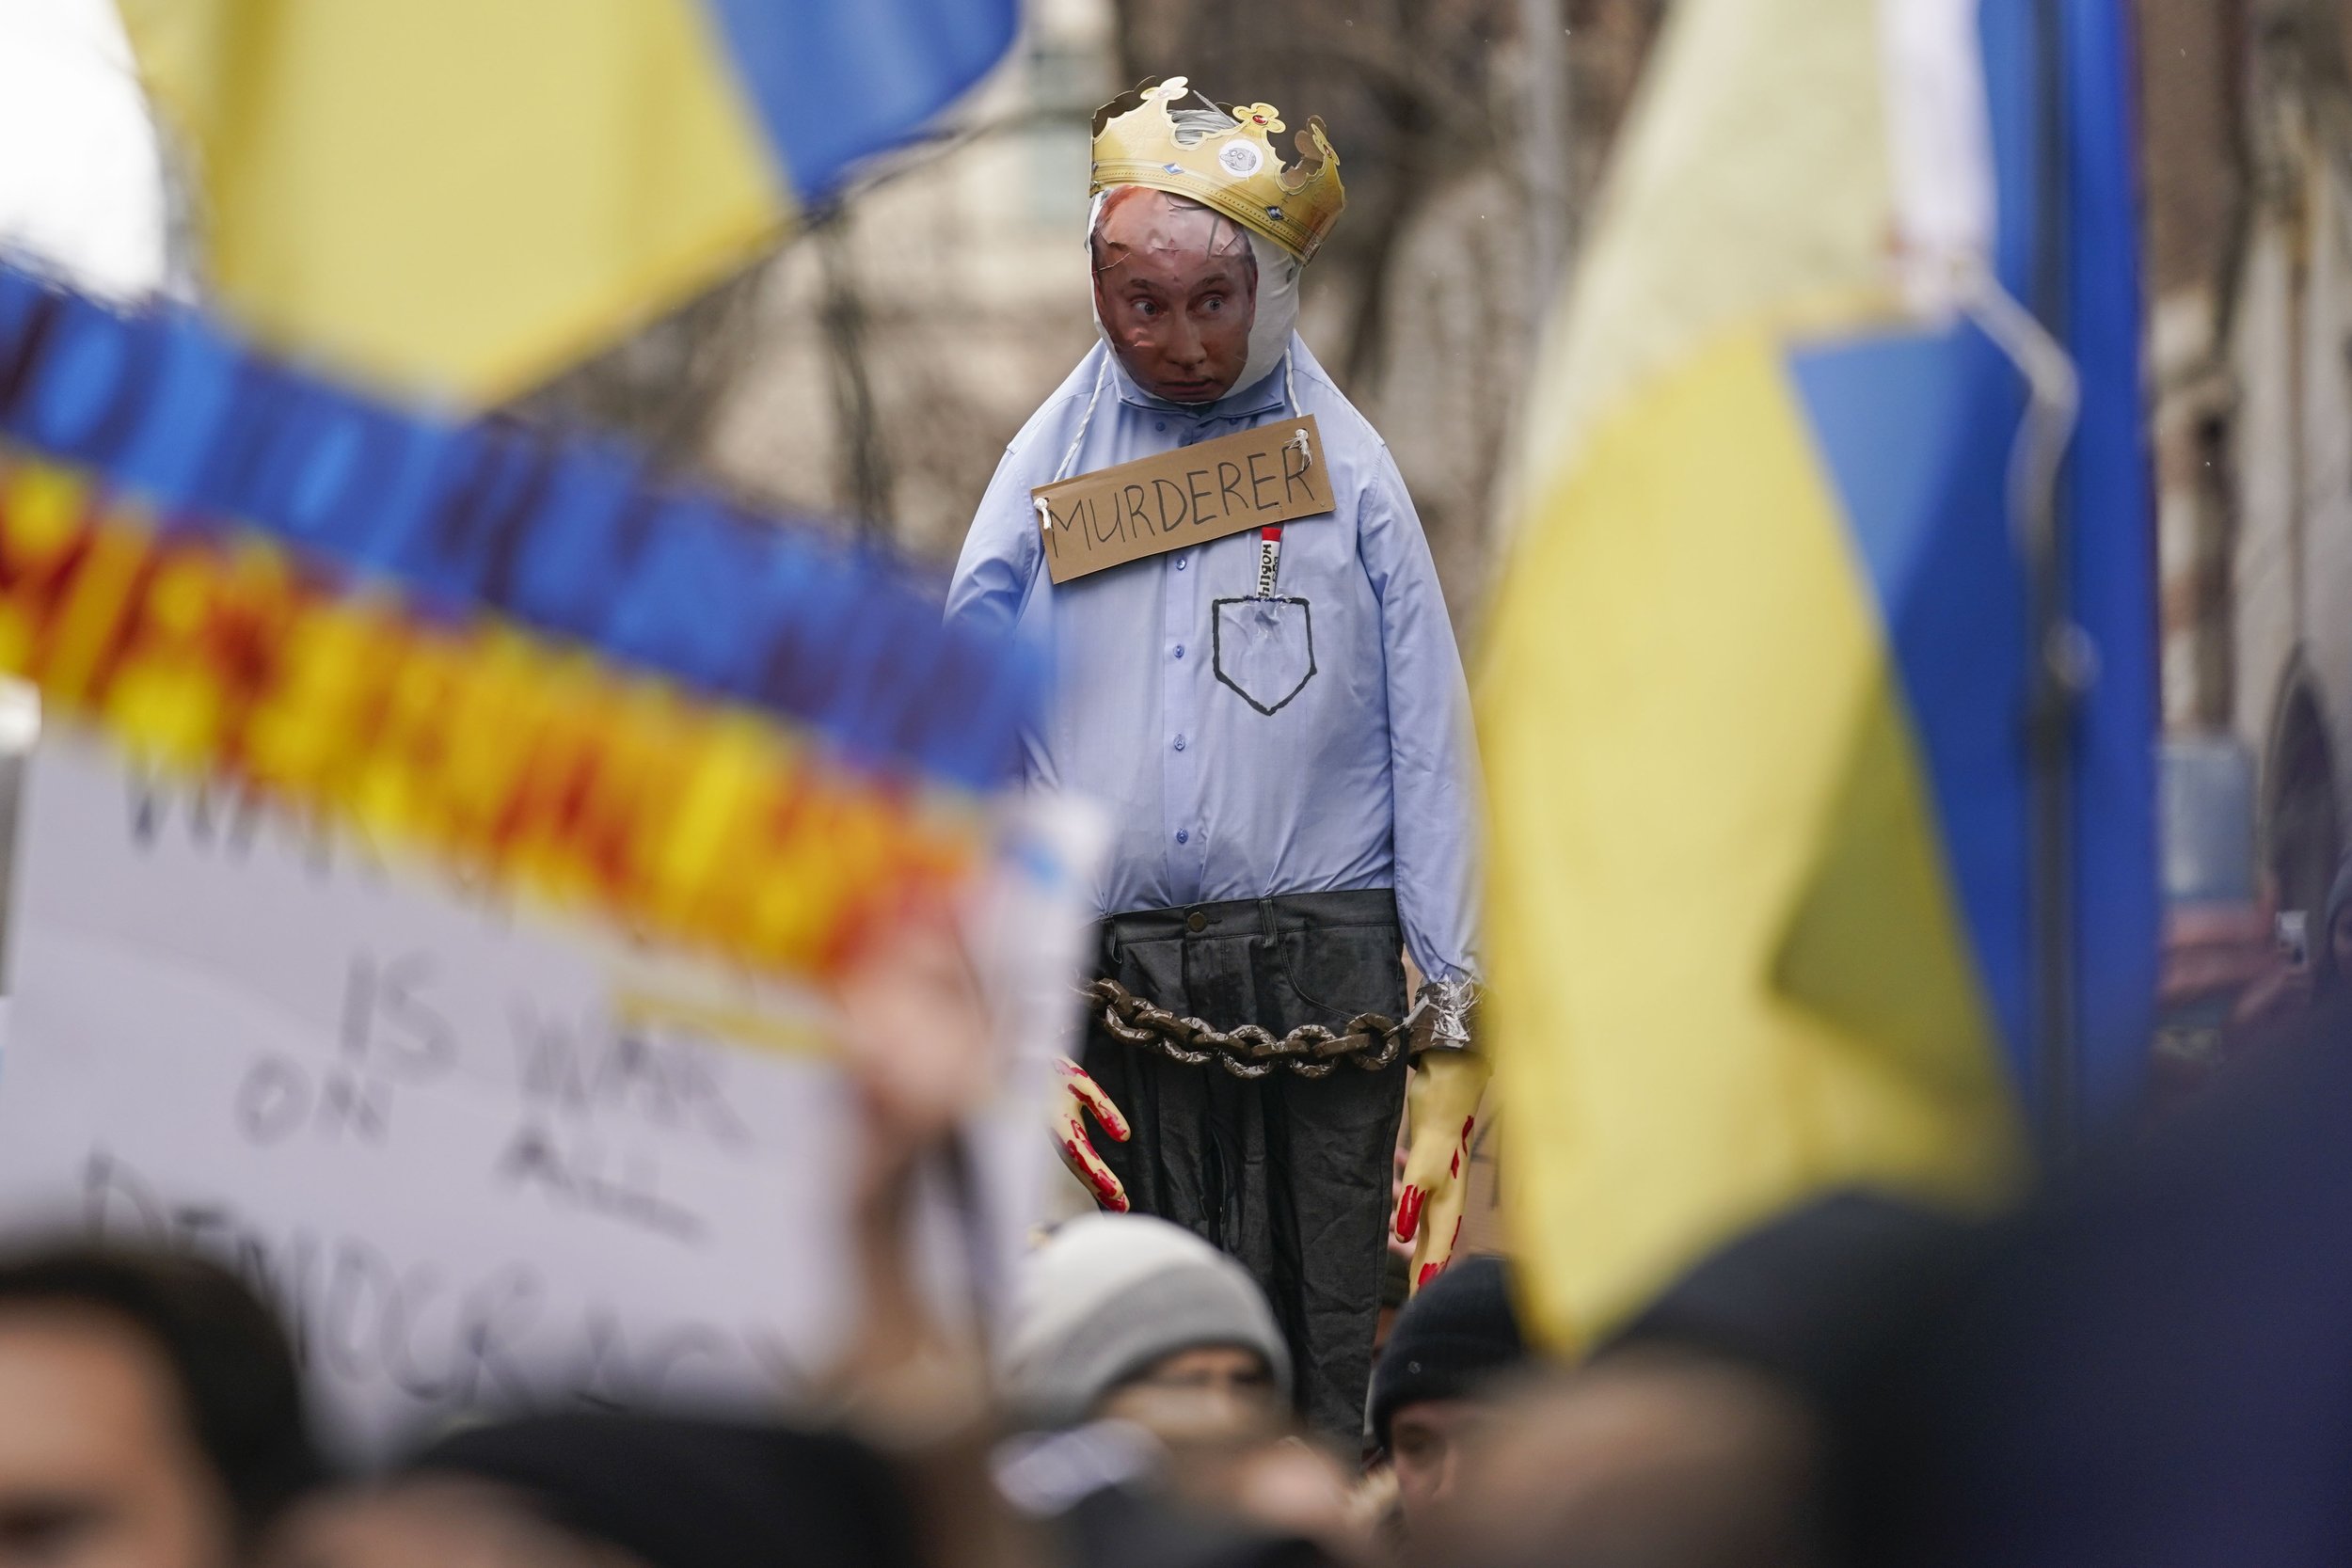  Pro-Ukraine demonstrators carry signs and an effigy of Vladimir Putin near Russia's UN Mission, Thursday, Feb. 24, 2022, in New York. (AP Photo/Seth Wenig) 